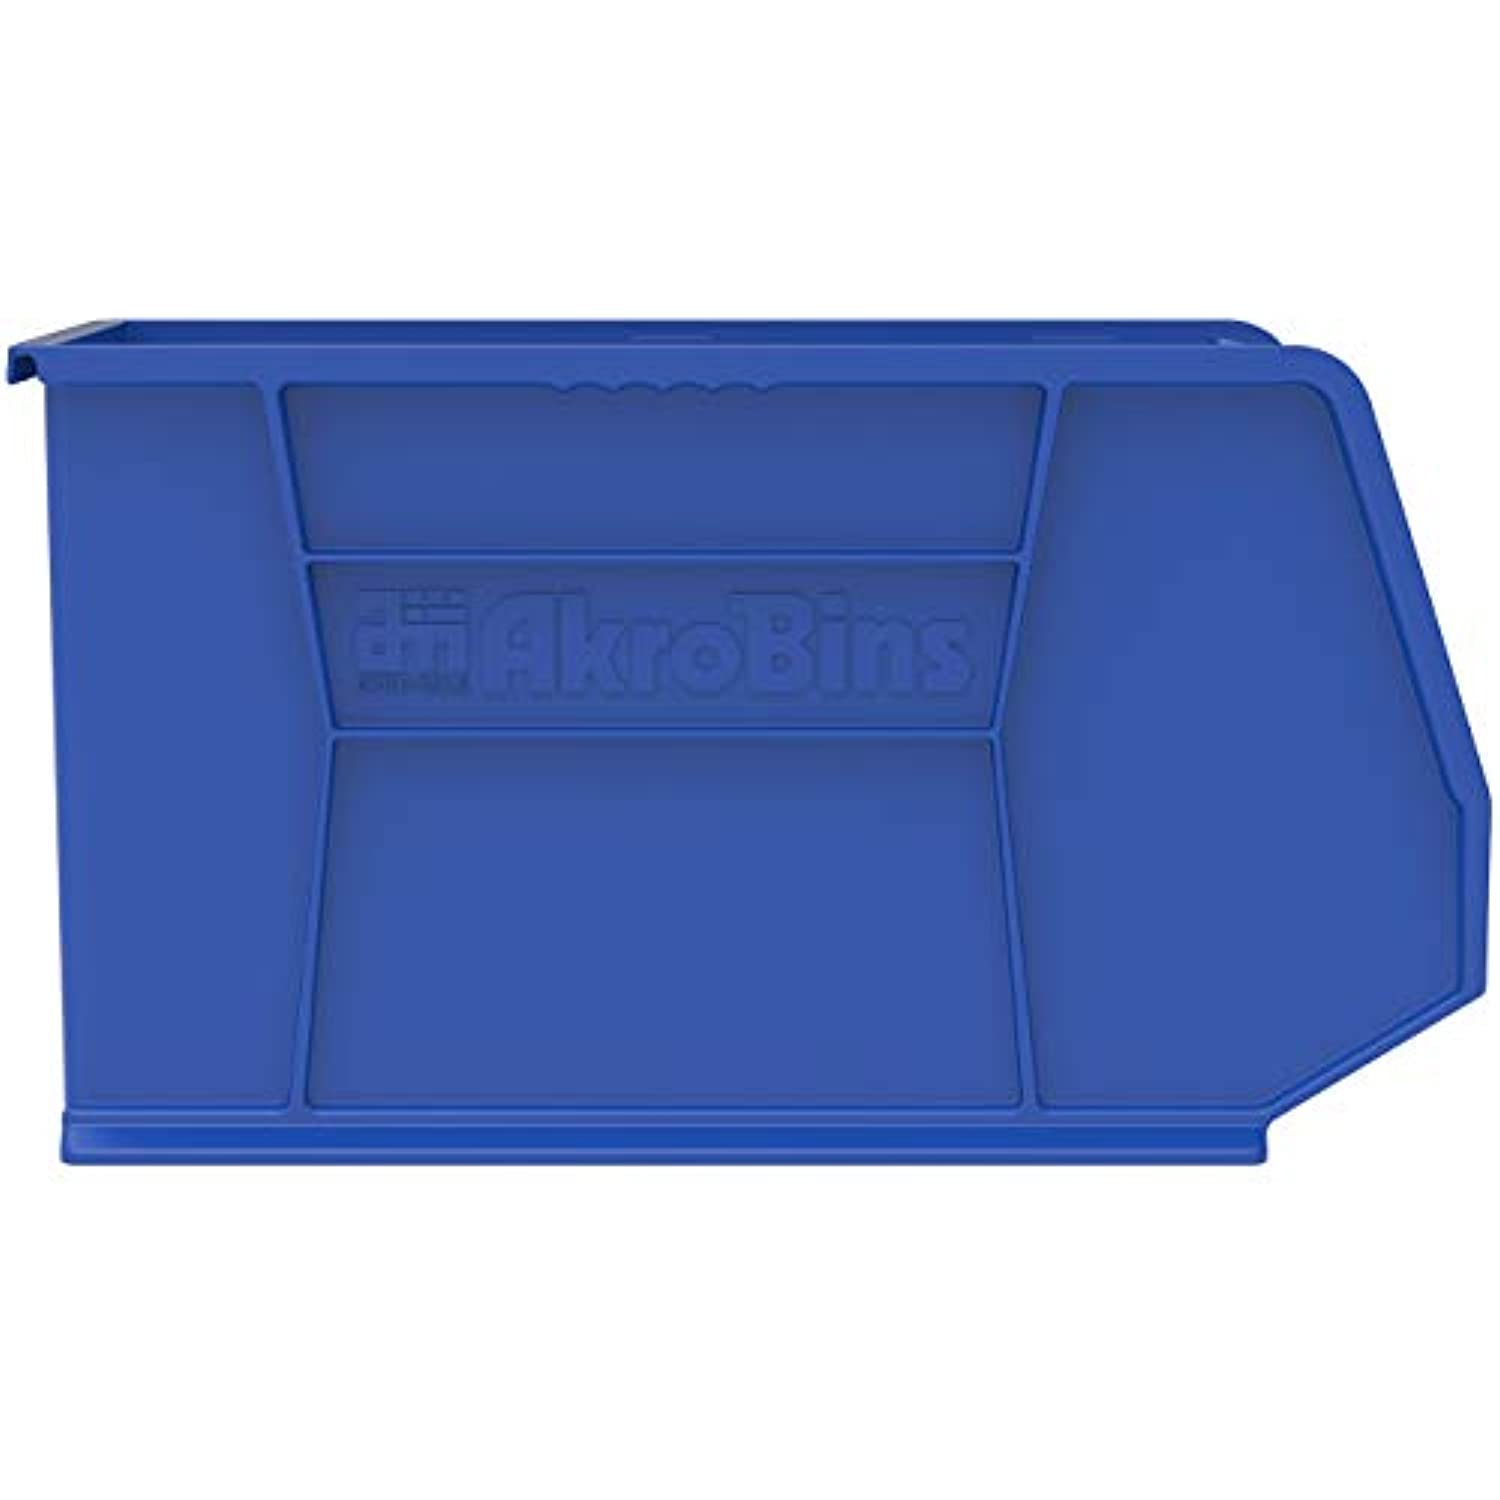 akro-mils 30265 plastic storage stacking hanging akro bin, 18-inch by 8-inch by 9-inch, blue, case of 6 - image 2 of 6